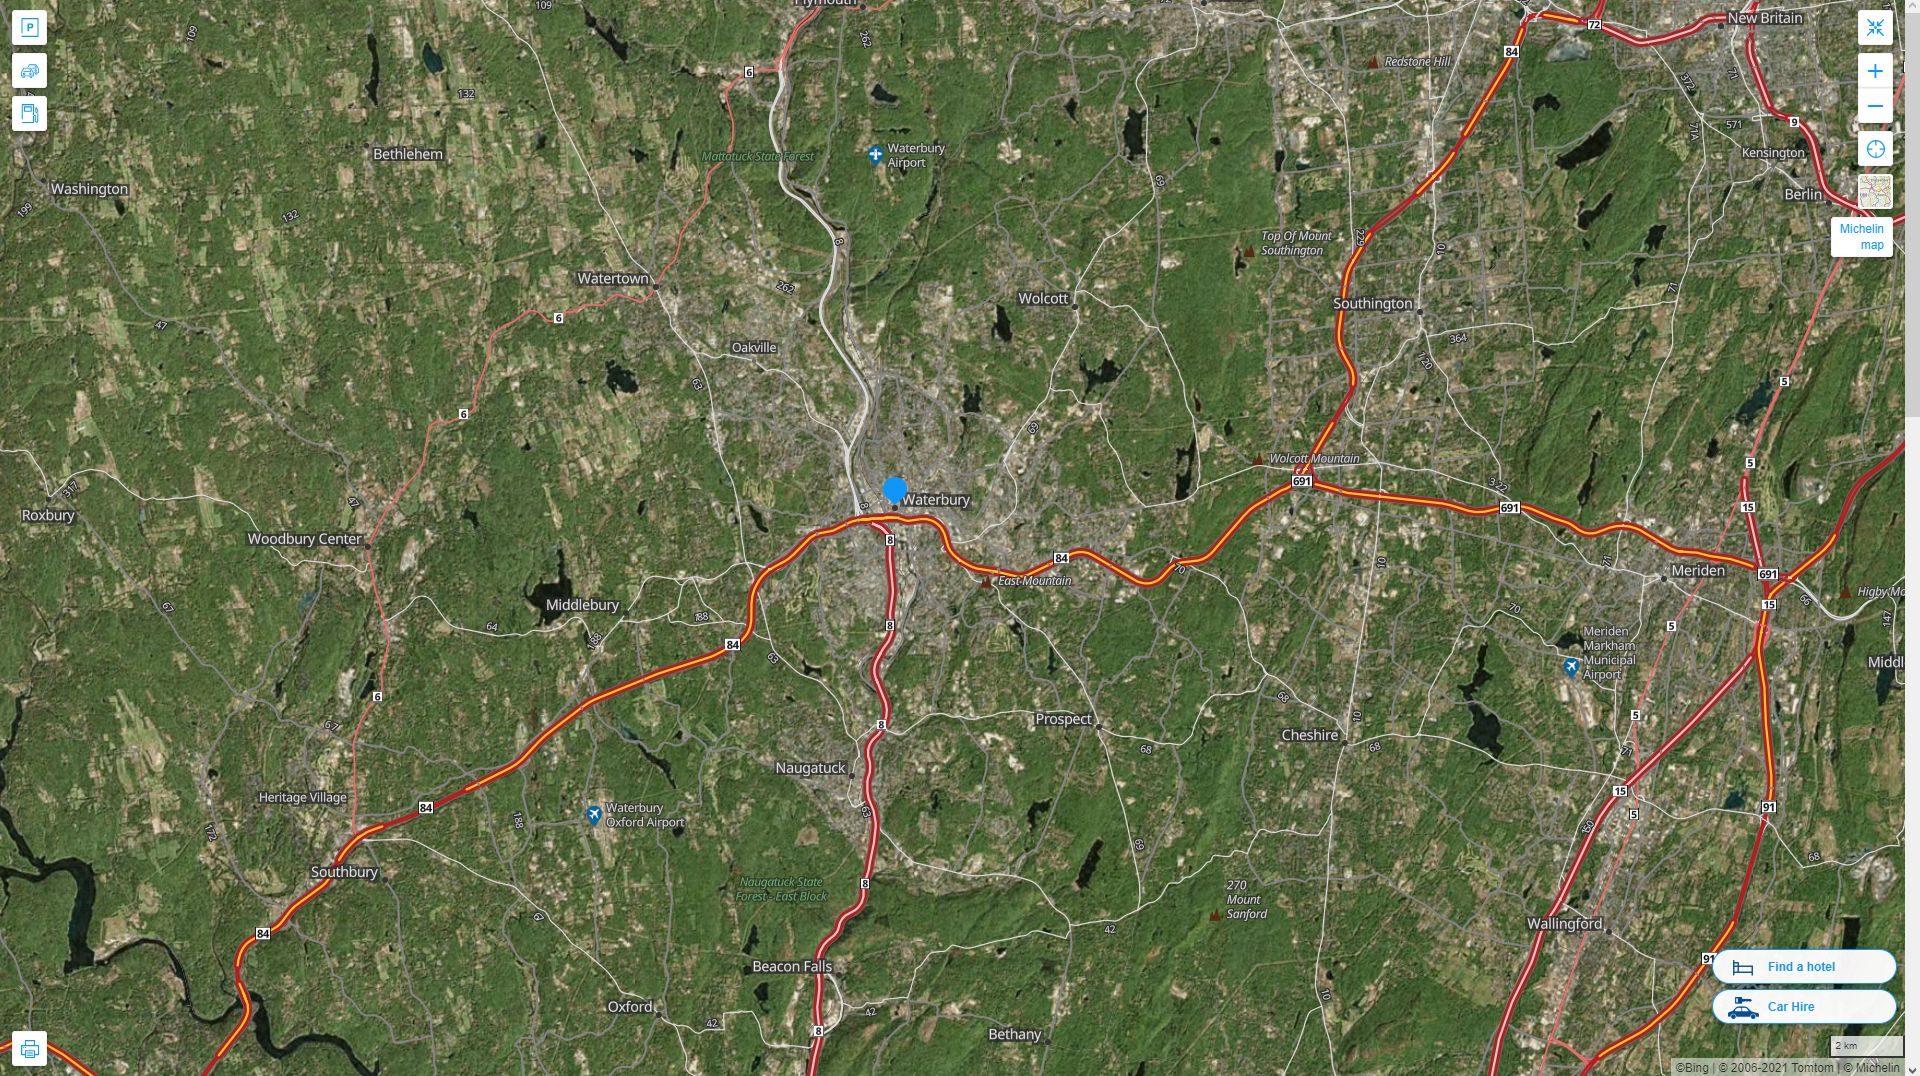 Waterbury Connecticut Highway and Road Map with Satellite View